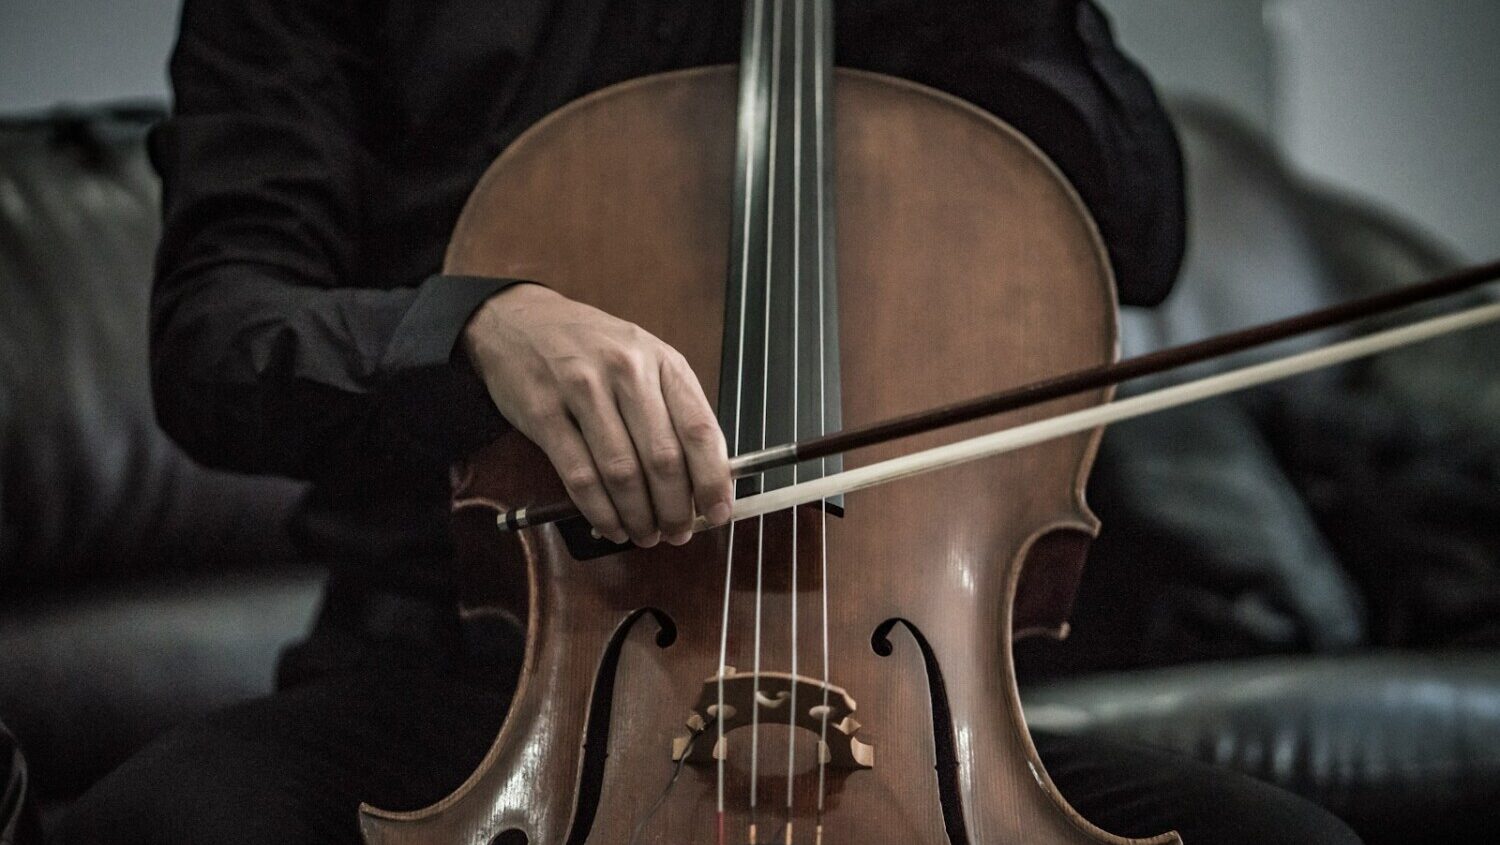 person wearing black dress shirt playing brown cello string instrument